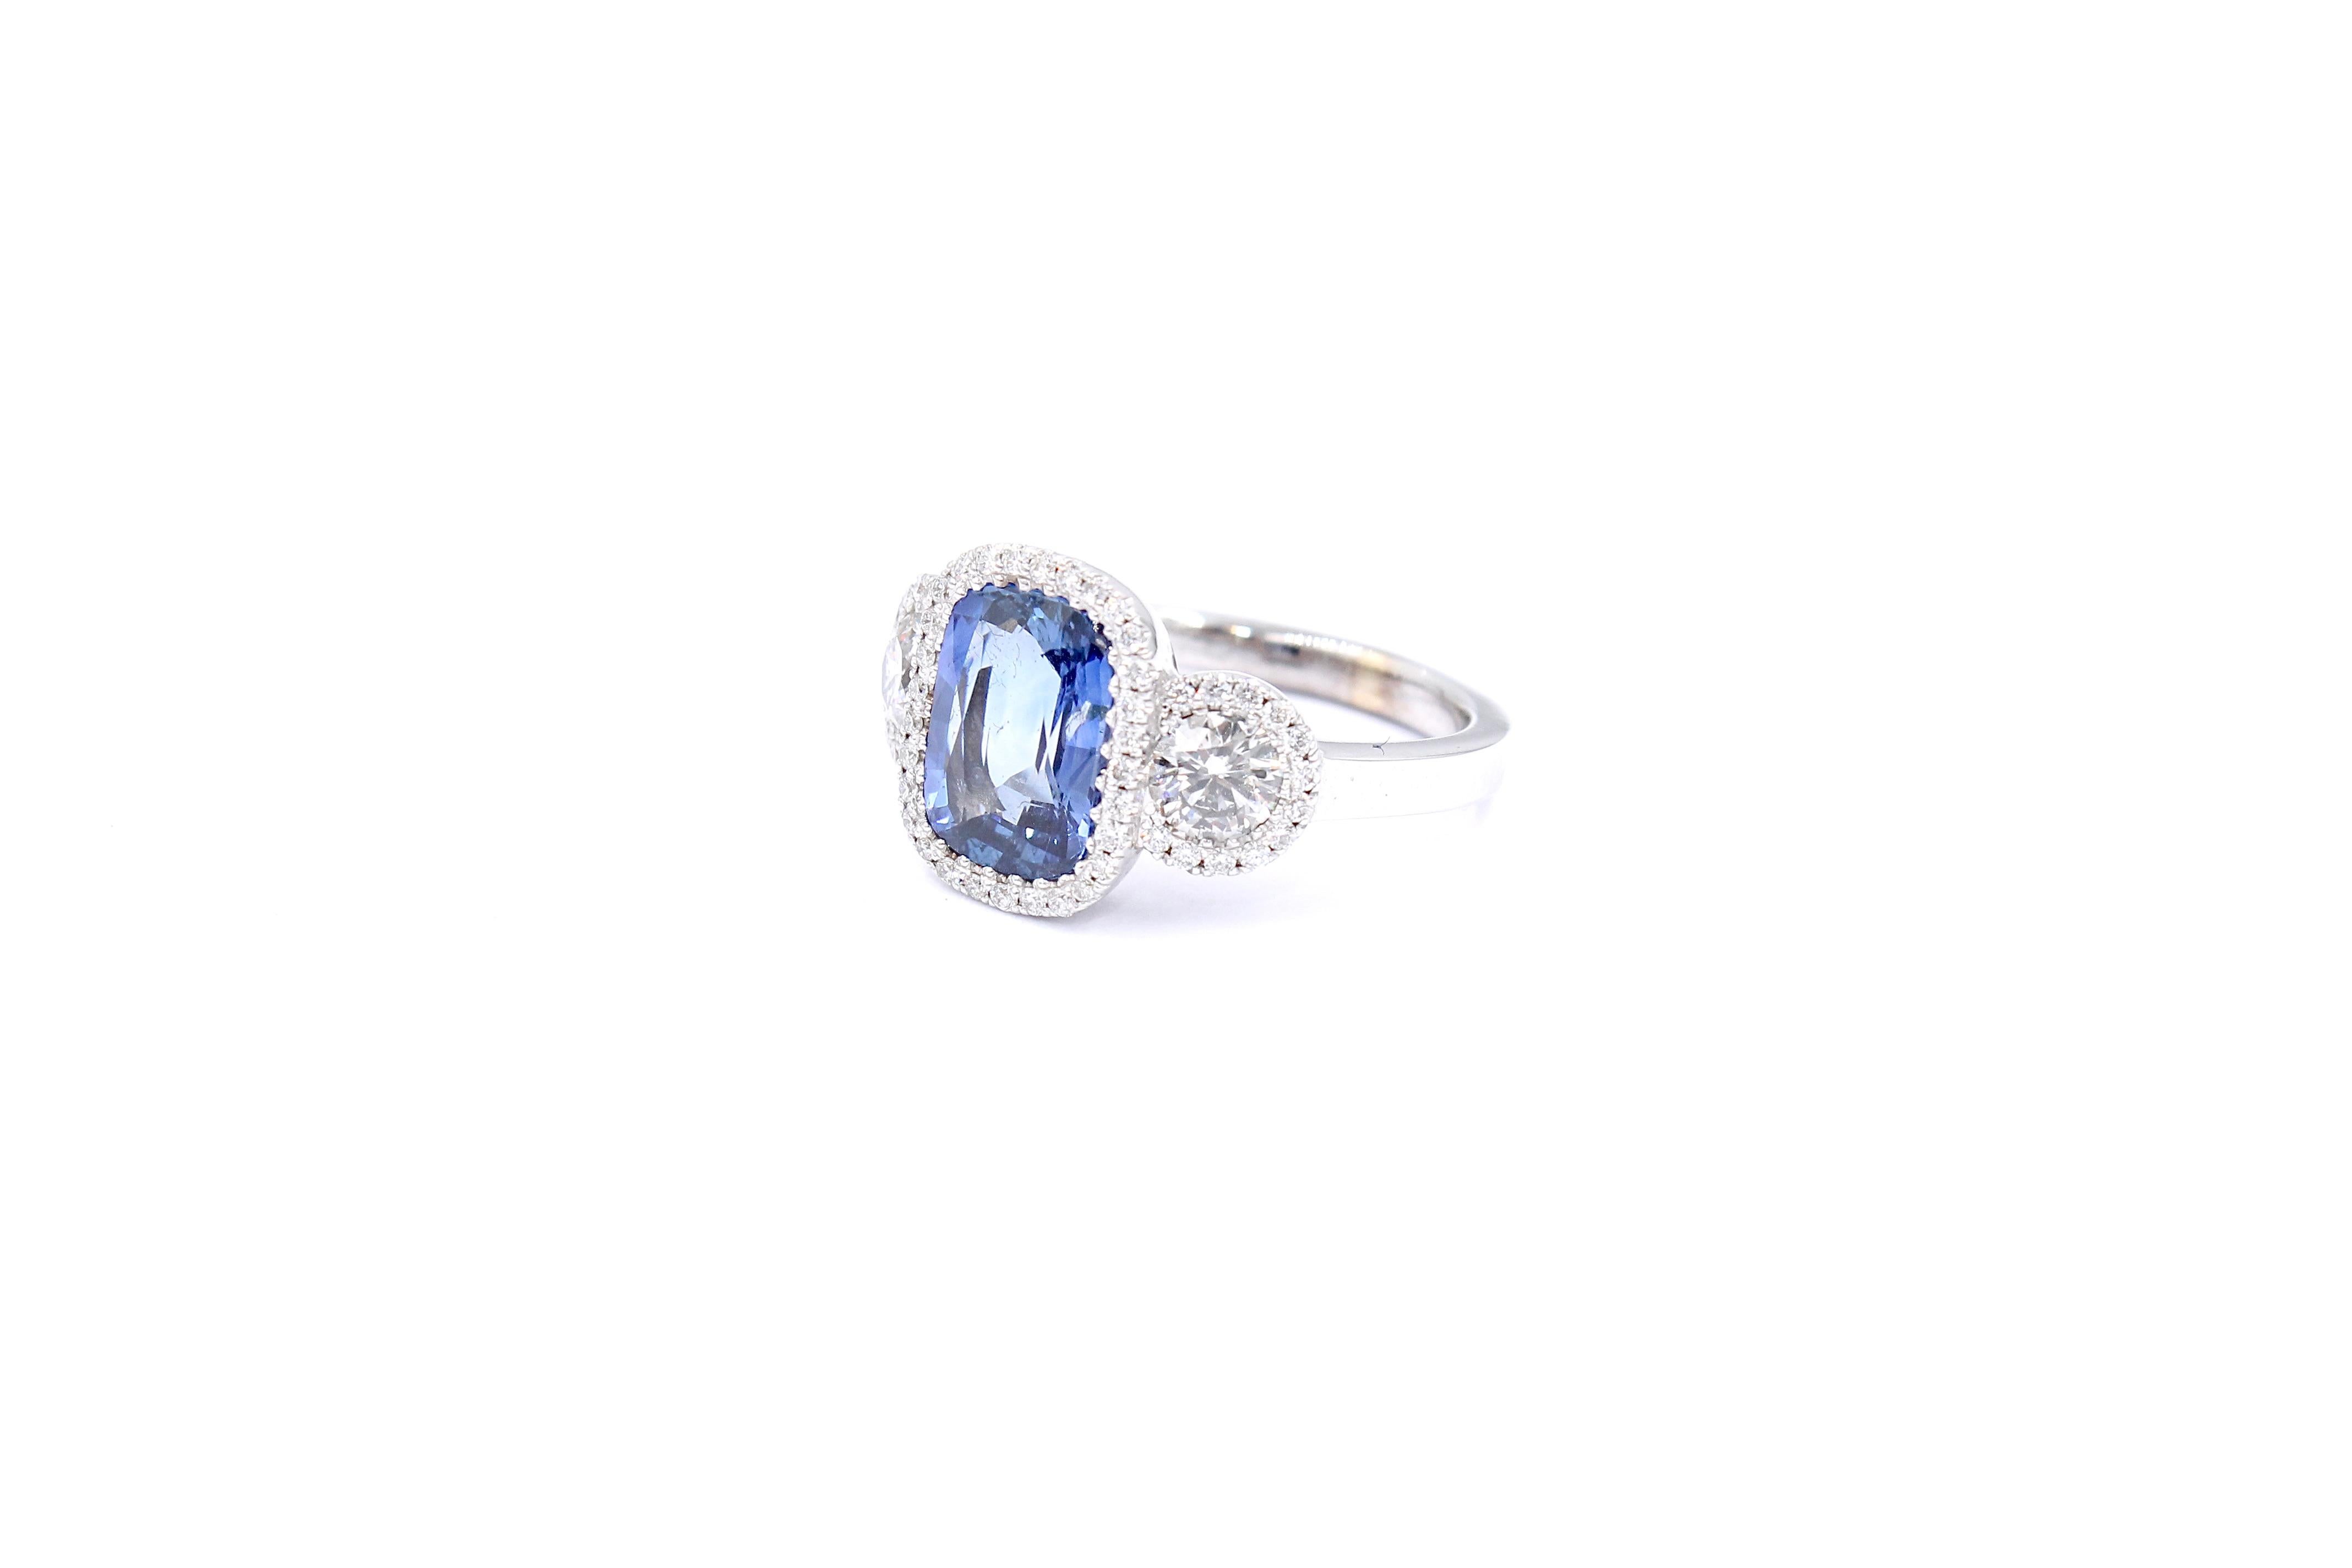 18 Karat white gold ring. 

Ring set with a center very pleasant blue Ceylon sapphire of 3.06 Carats, 2 side brilliant shape diamonds for a total of 0.63 Carats and 0.32 Carats full cut diamonds. 

All the diamonds natural,  H color - Vs clarity .